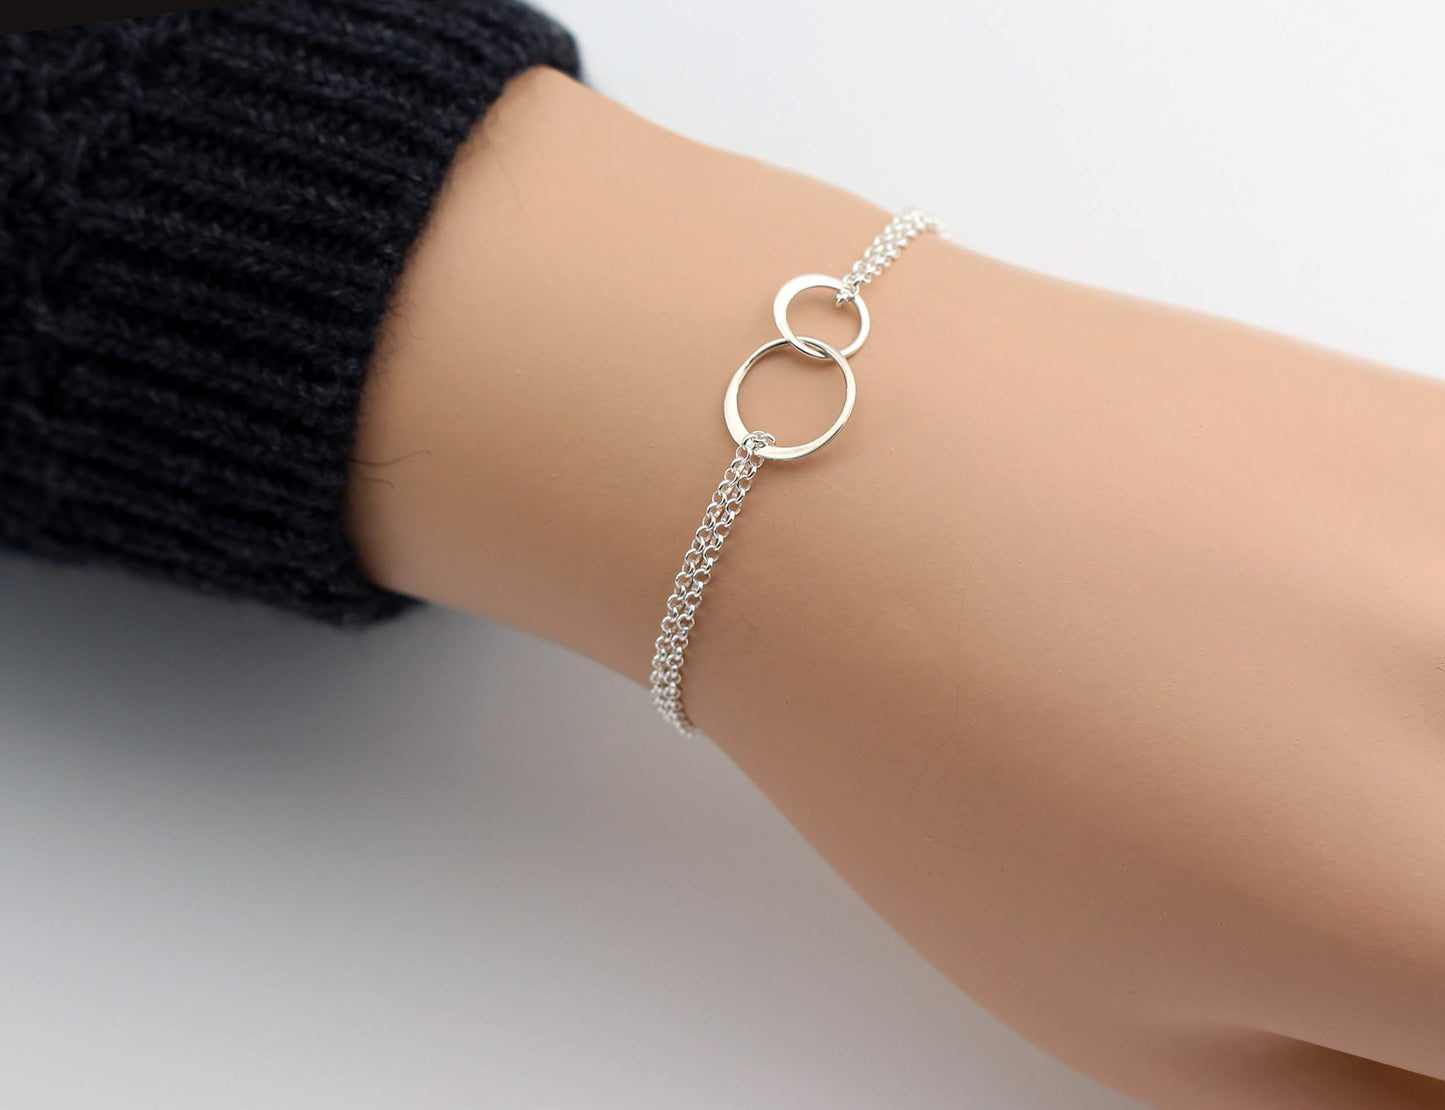 A Charmed Impression Tribe Friendship Bracelet • Sterling Silver Jewelry • Two Connected Circles • Friends Forever • Soul Sister Gift Bracelet • Birthday Gifts for Women • Friendship Jewelry